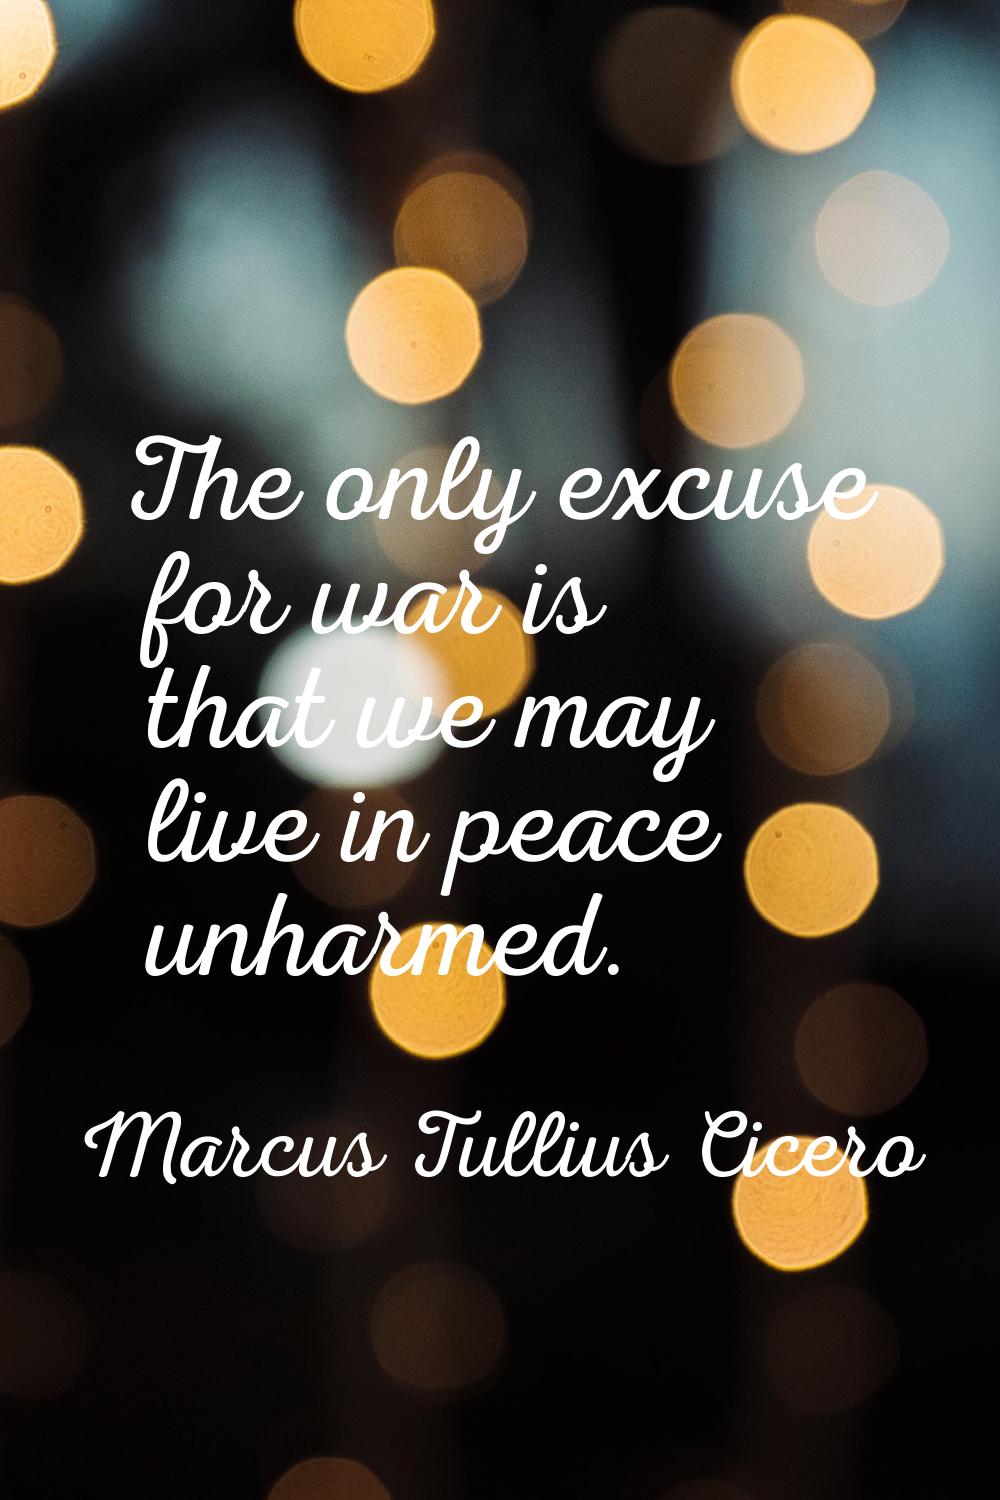 The only excuse for war is that we may live in peace unharmed.